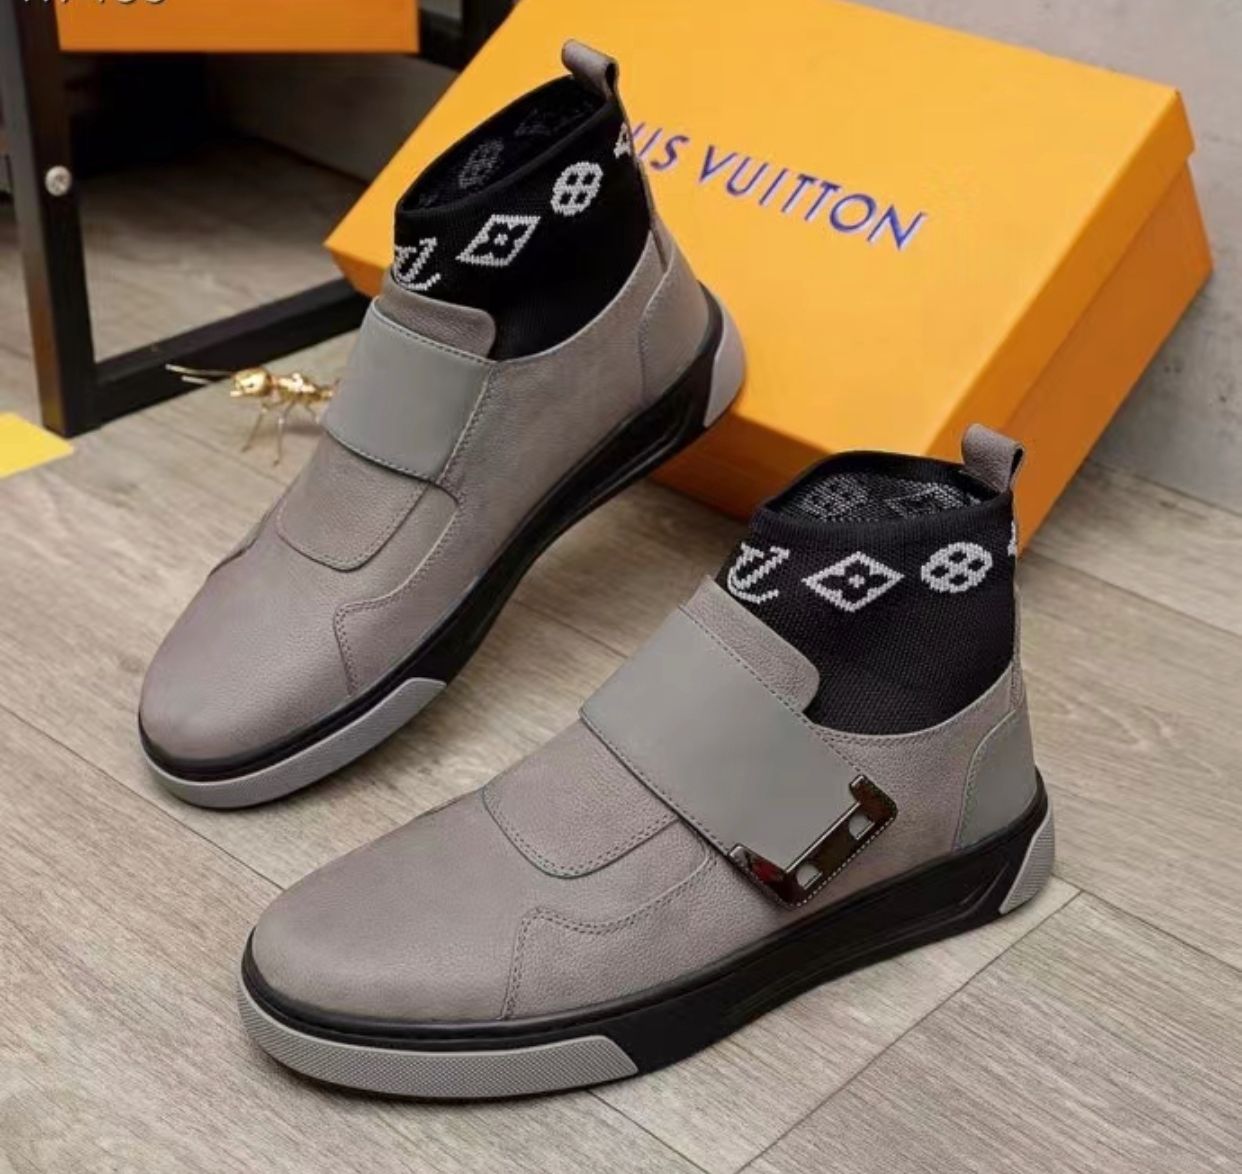 CLASSIC DESIGNER SNEAKERS | CartRollers Marketplace Shopping Store Lagos Nigeria